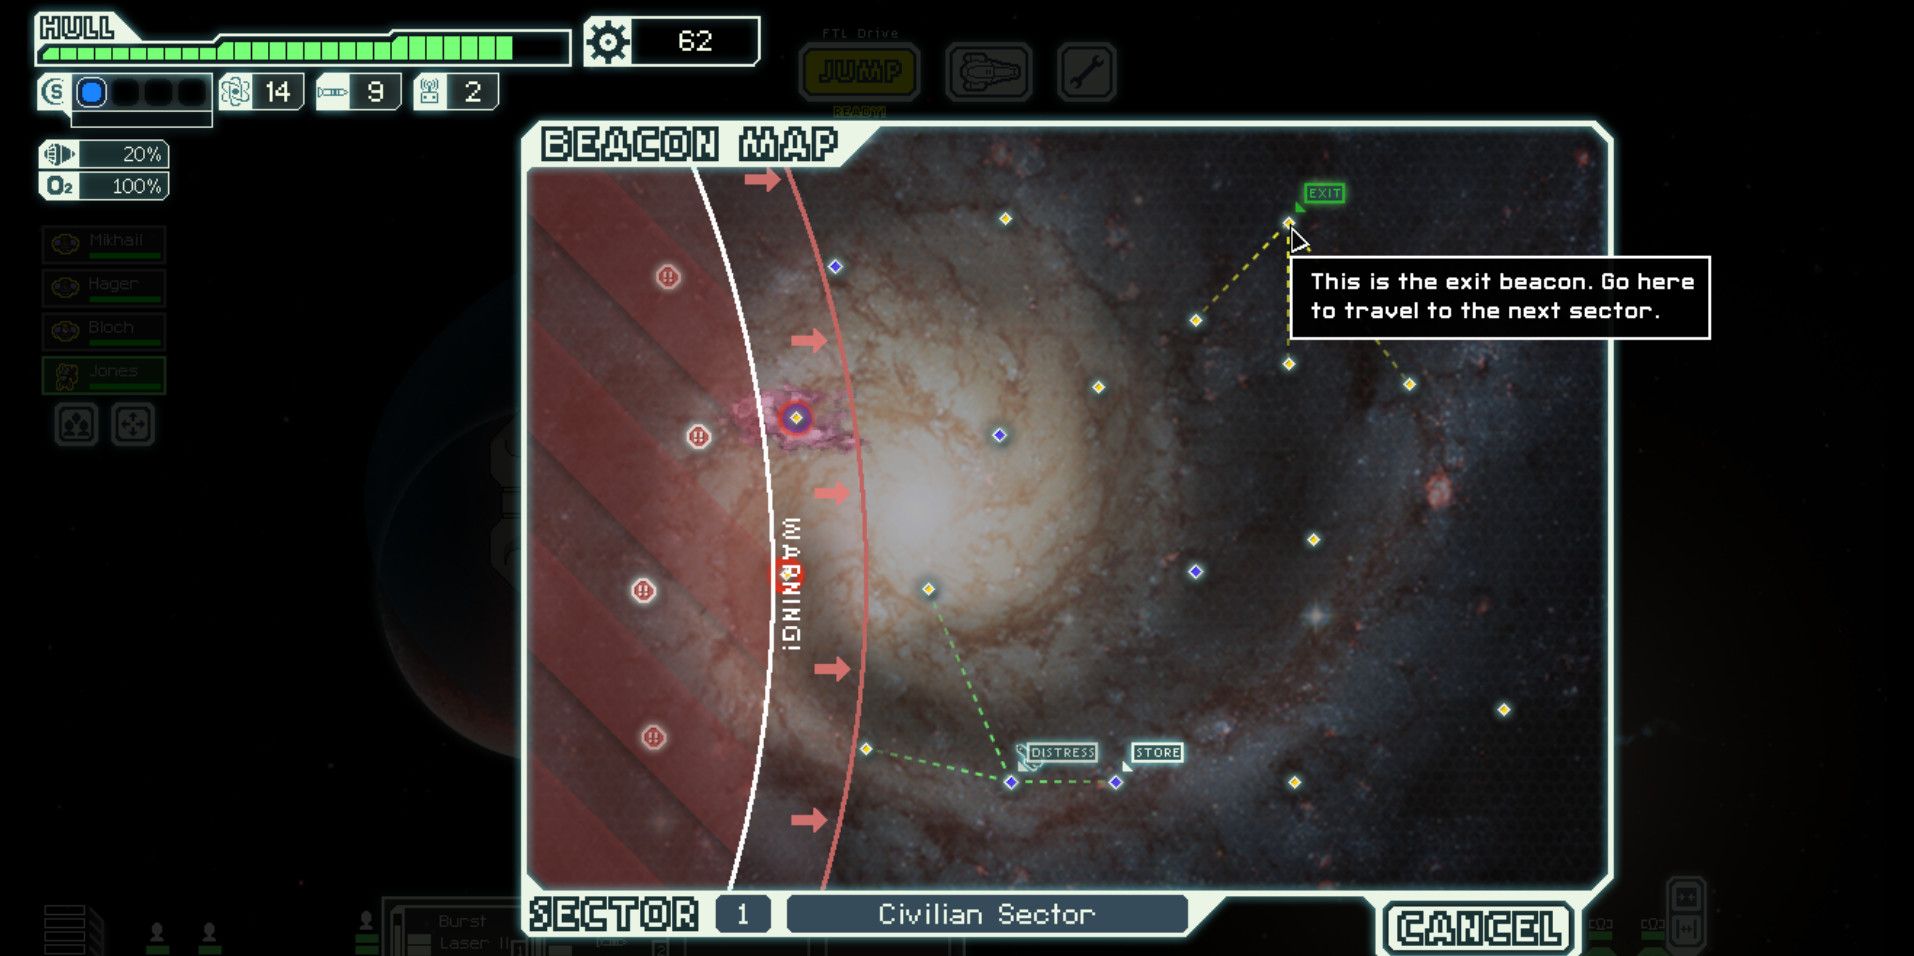 the star map, showing distress beacons and the exit beacon